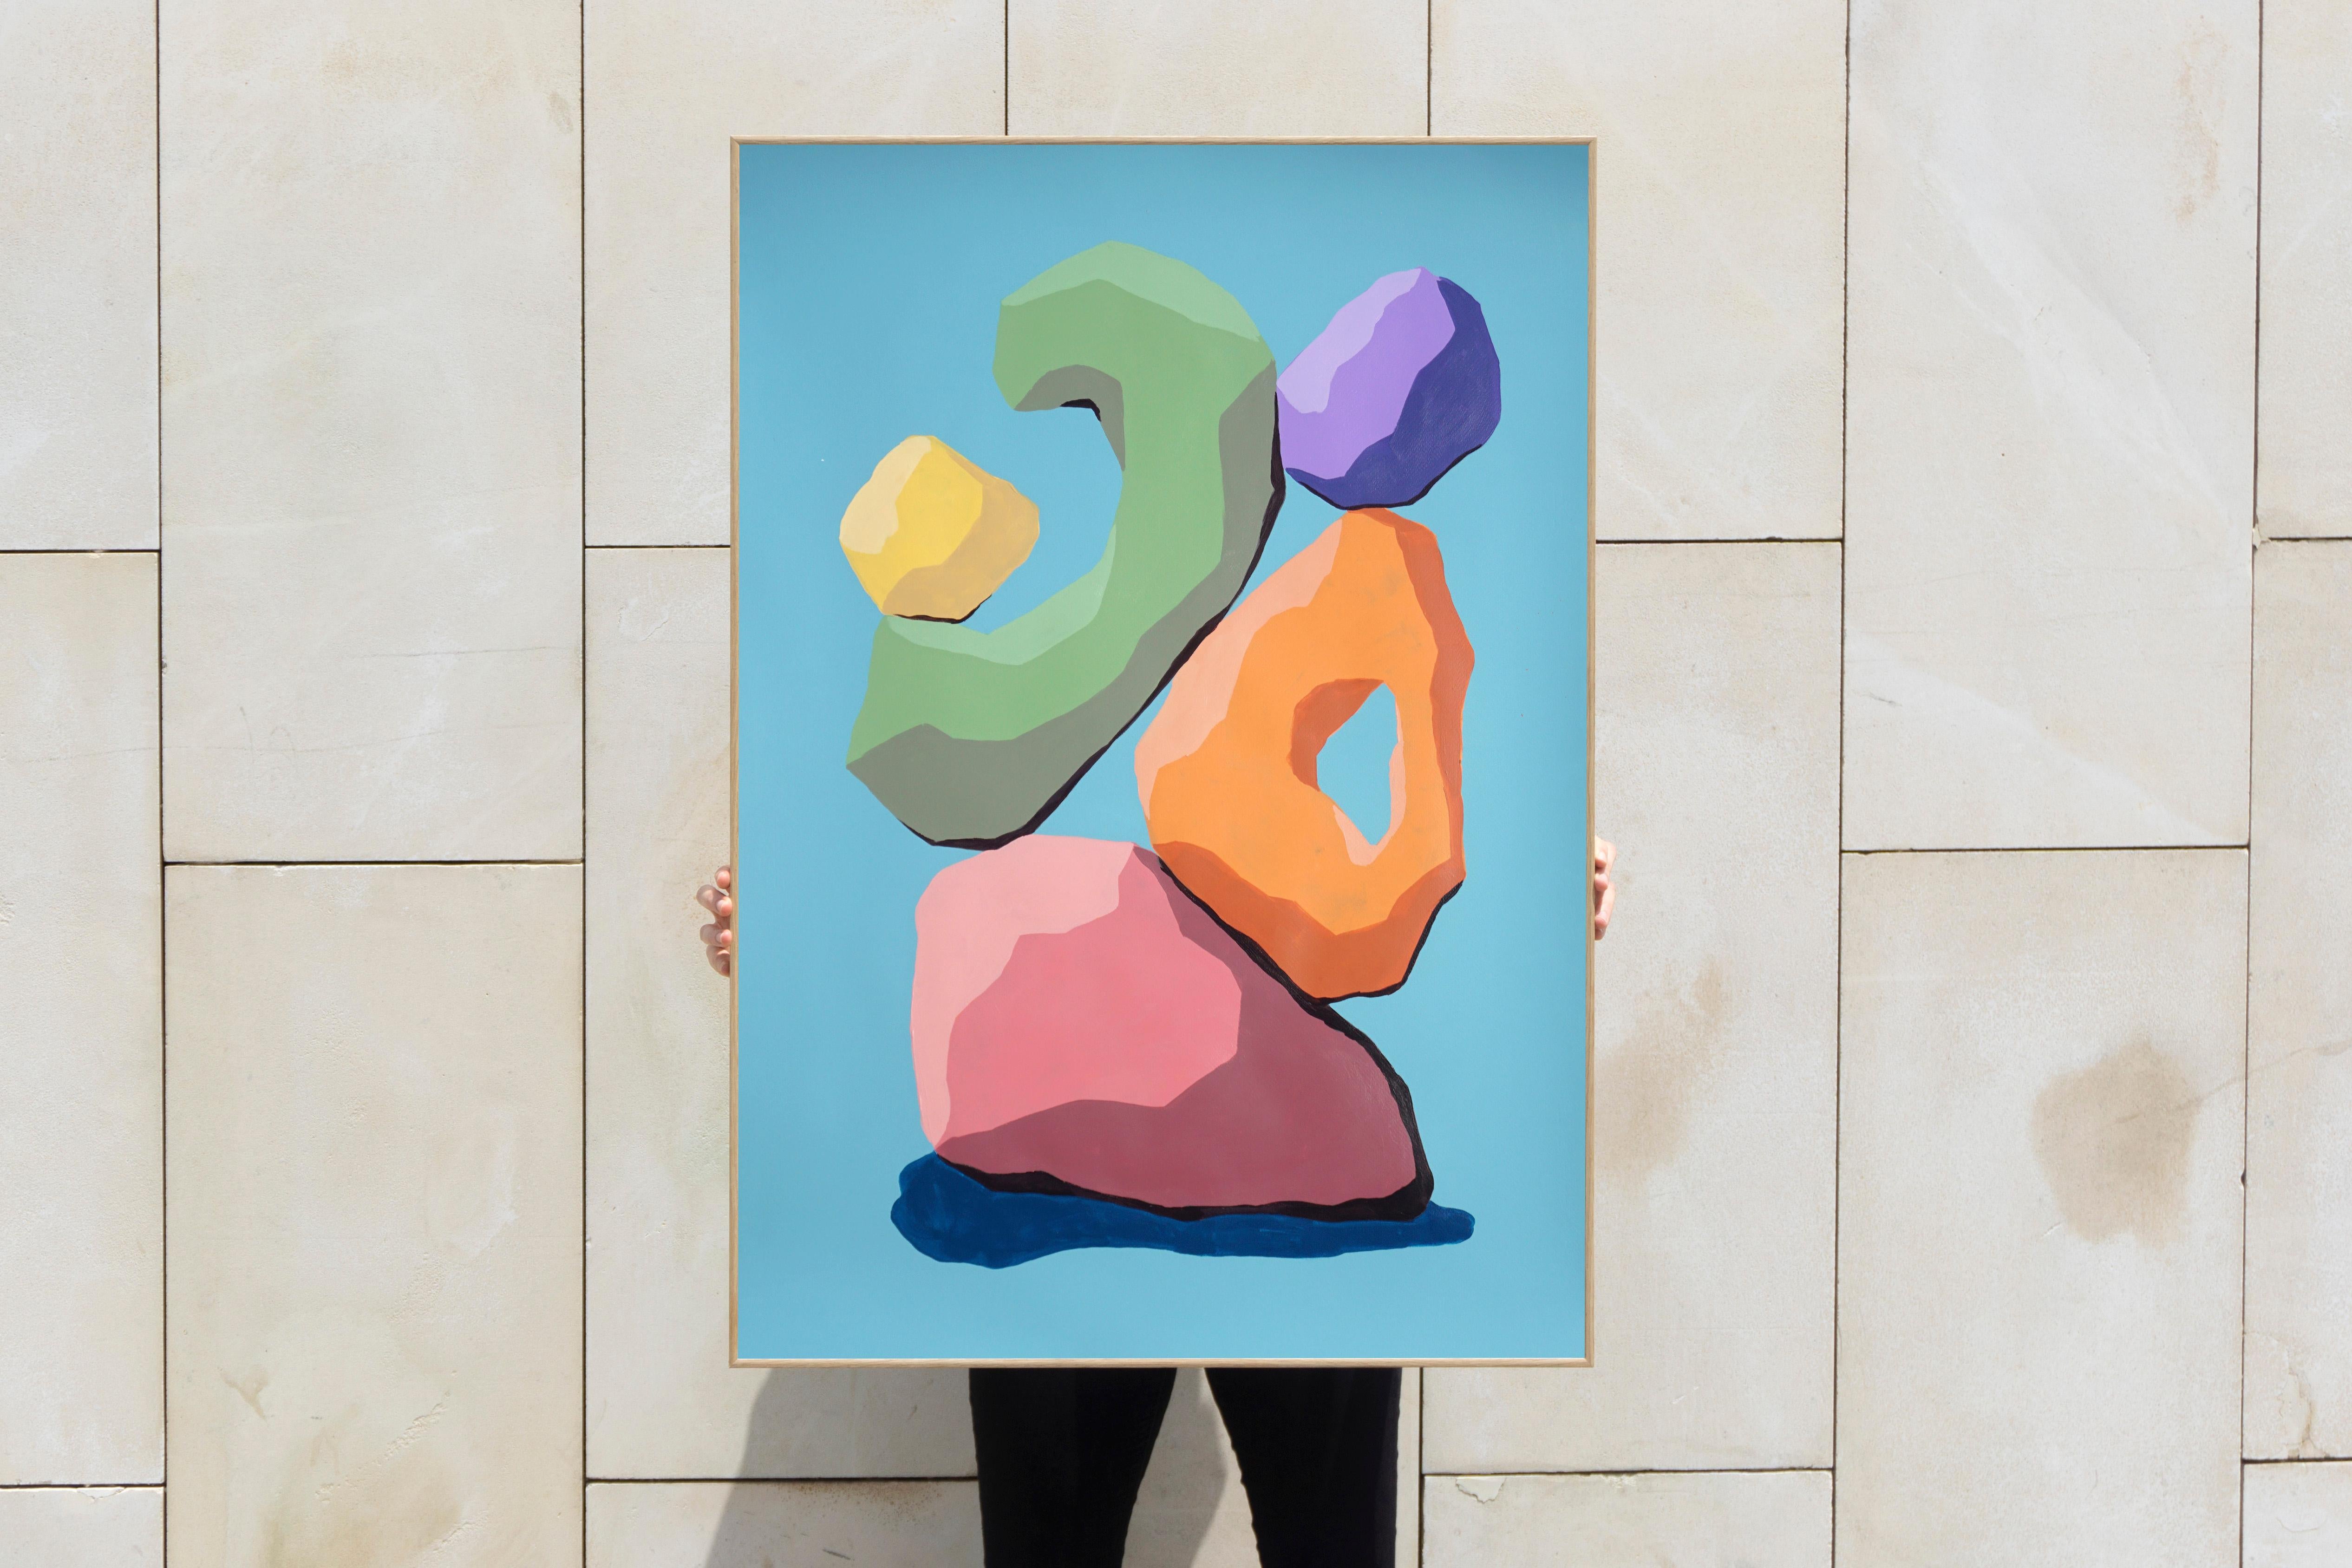 Coral Sculpture, Vivid Tones Totem, 3D Gems Stone in Blue, Pink, Orange, Yellow - Painting by Ryan Rivadeneyra